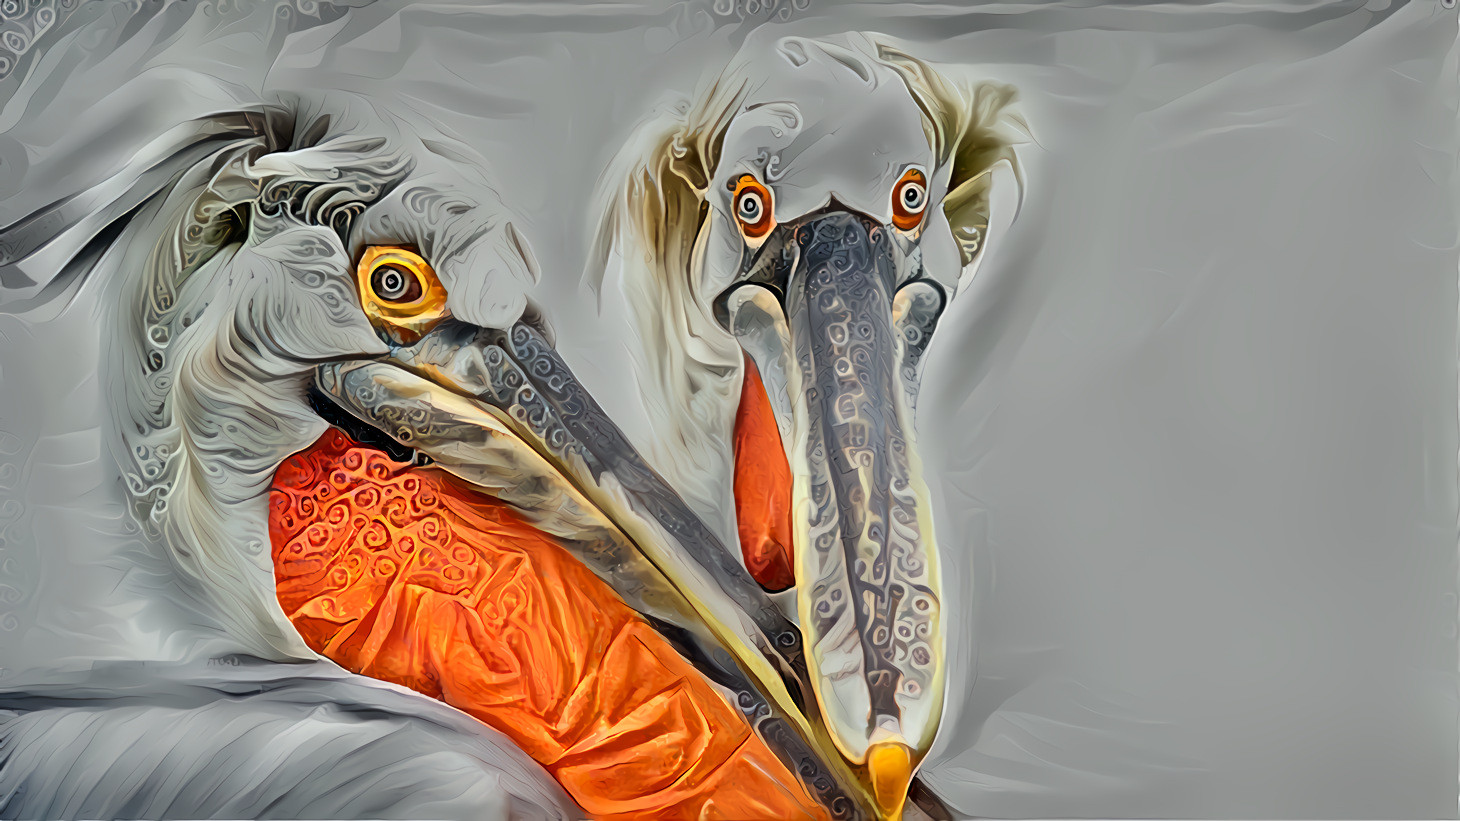 Day after Election Day.  Dalmatian Pelicans. Original photo by Birger Strahl on Unsplash.